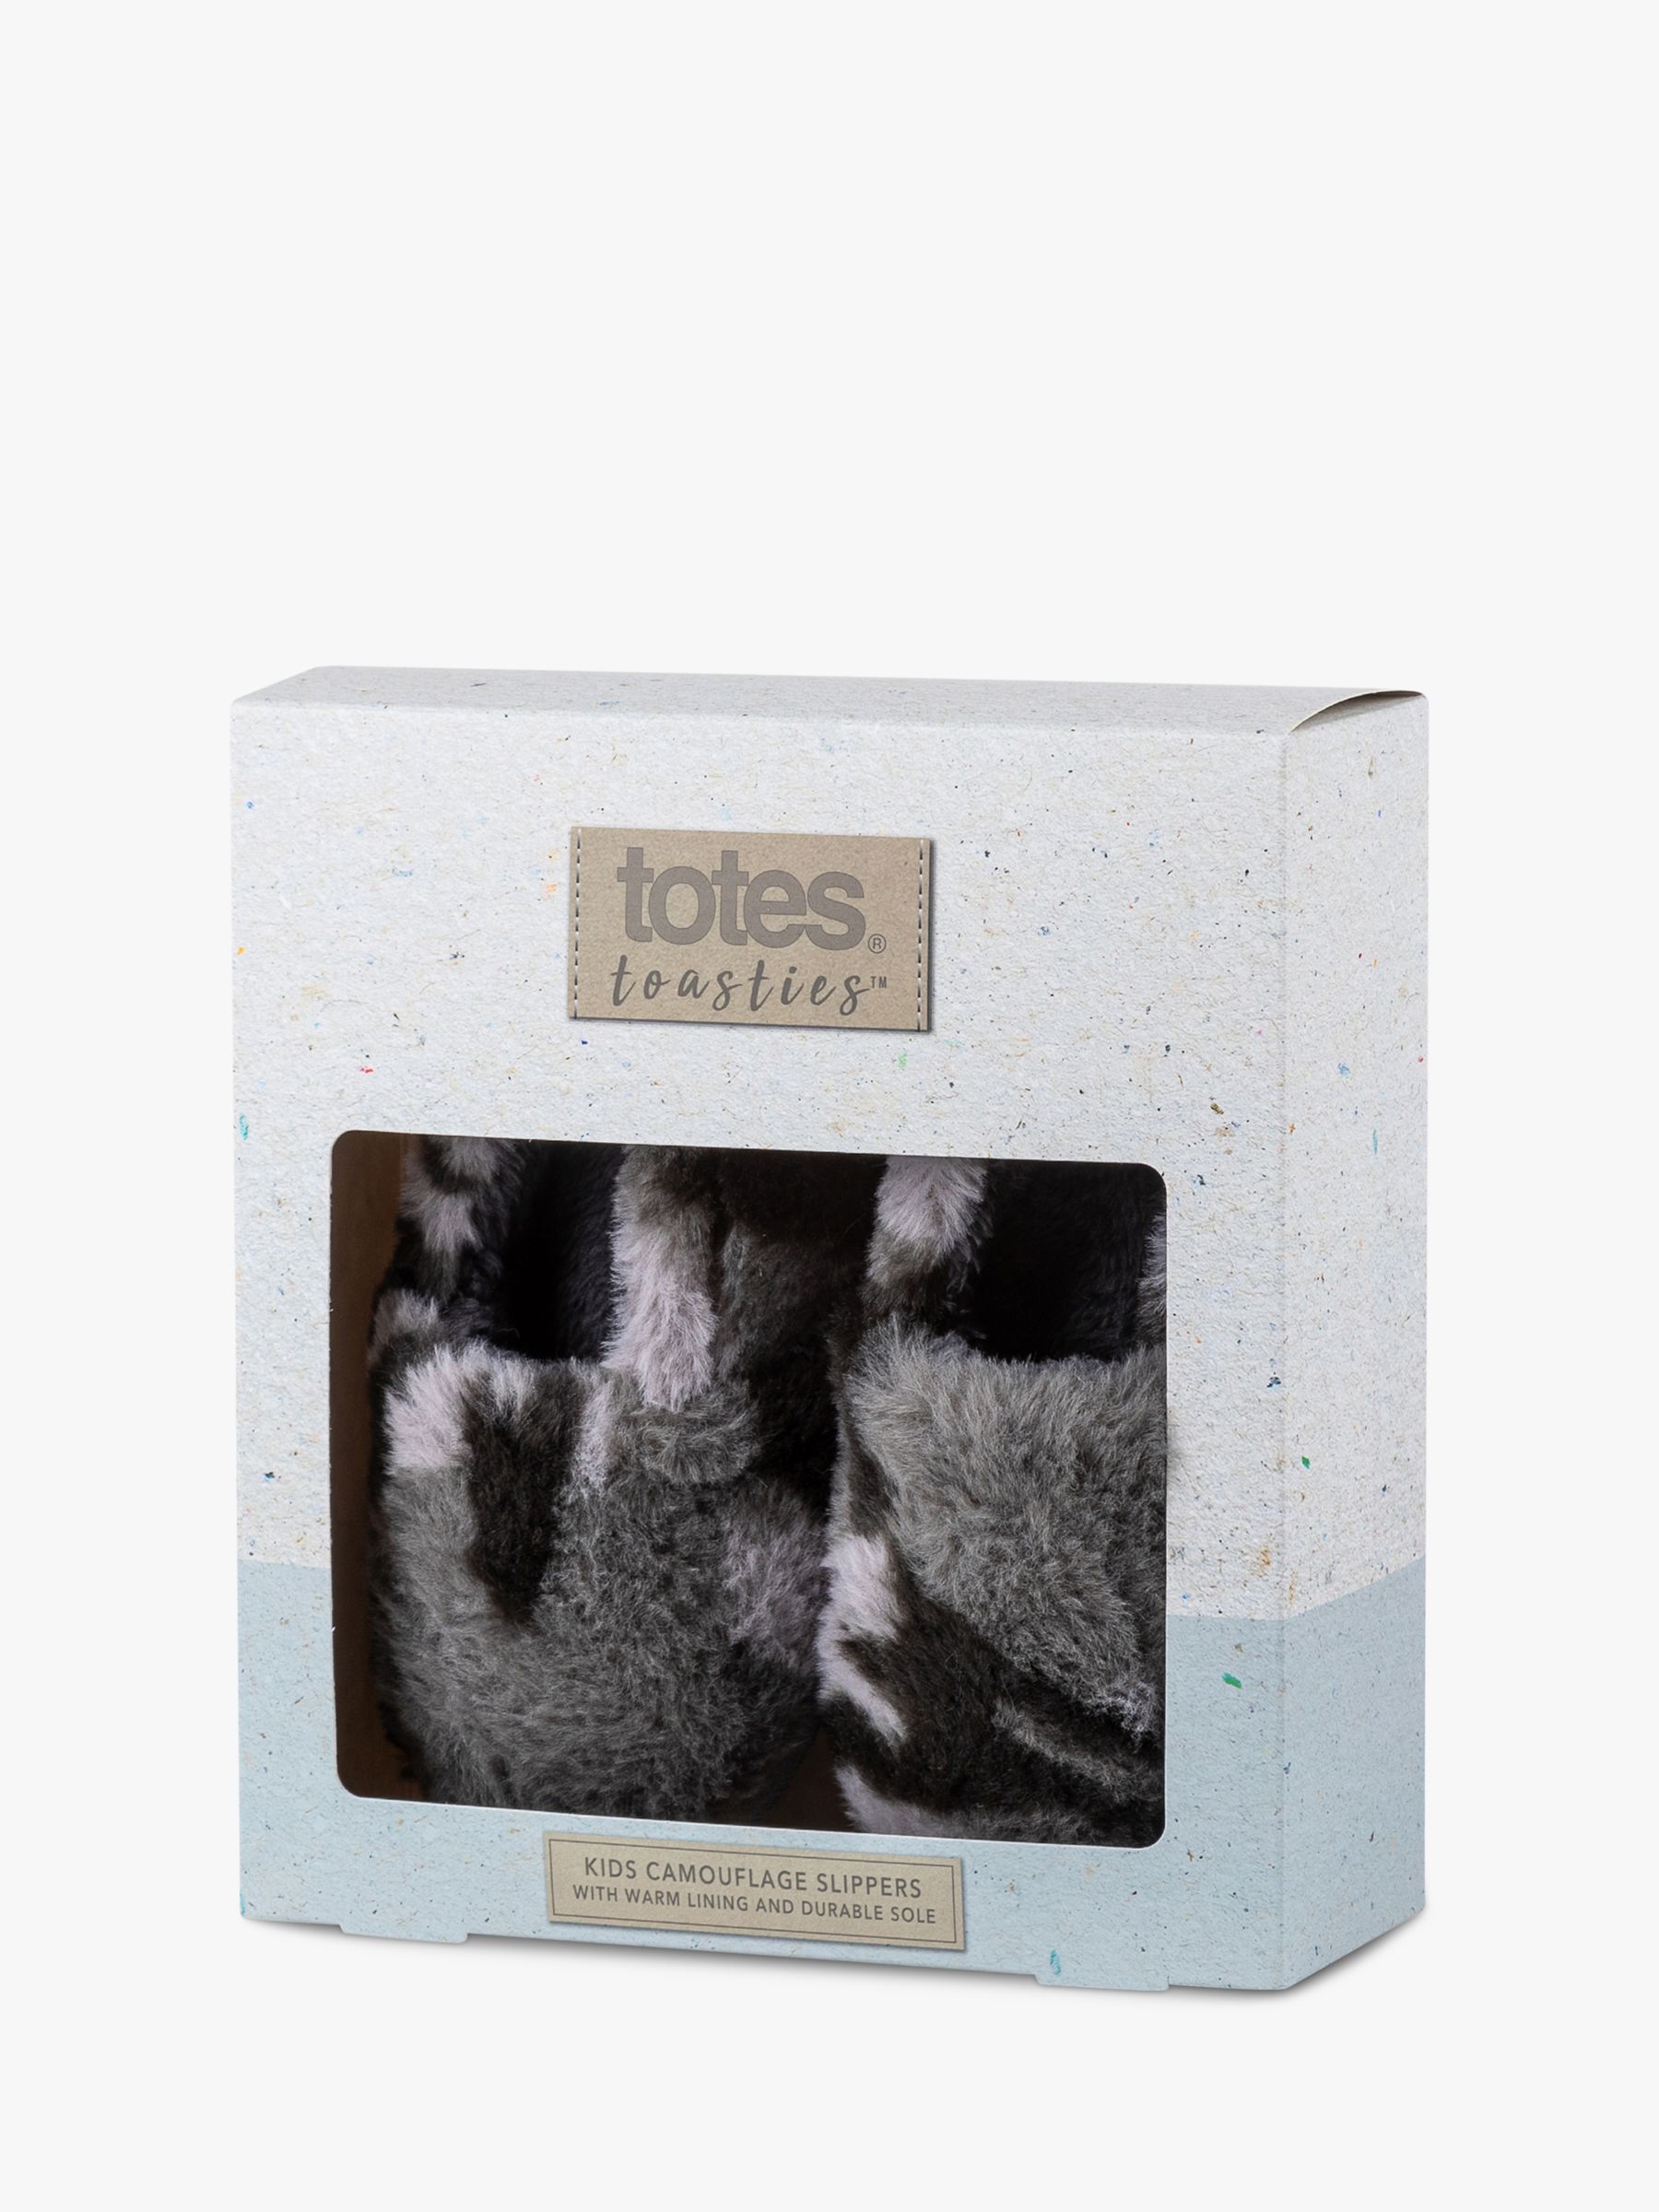 totes Kids' Camouflage Slippers at John Lewis & Partners